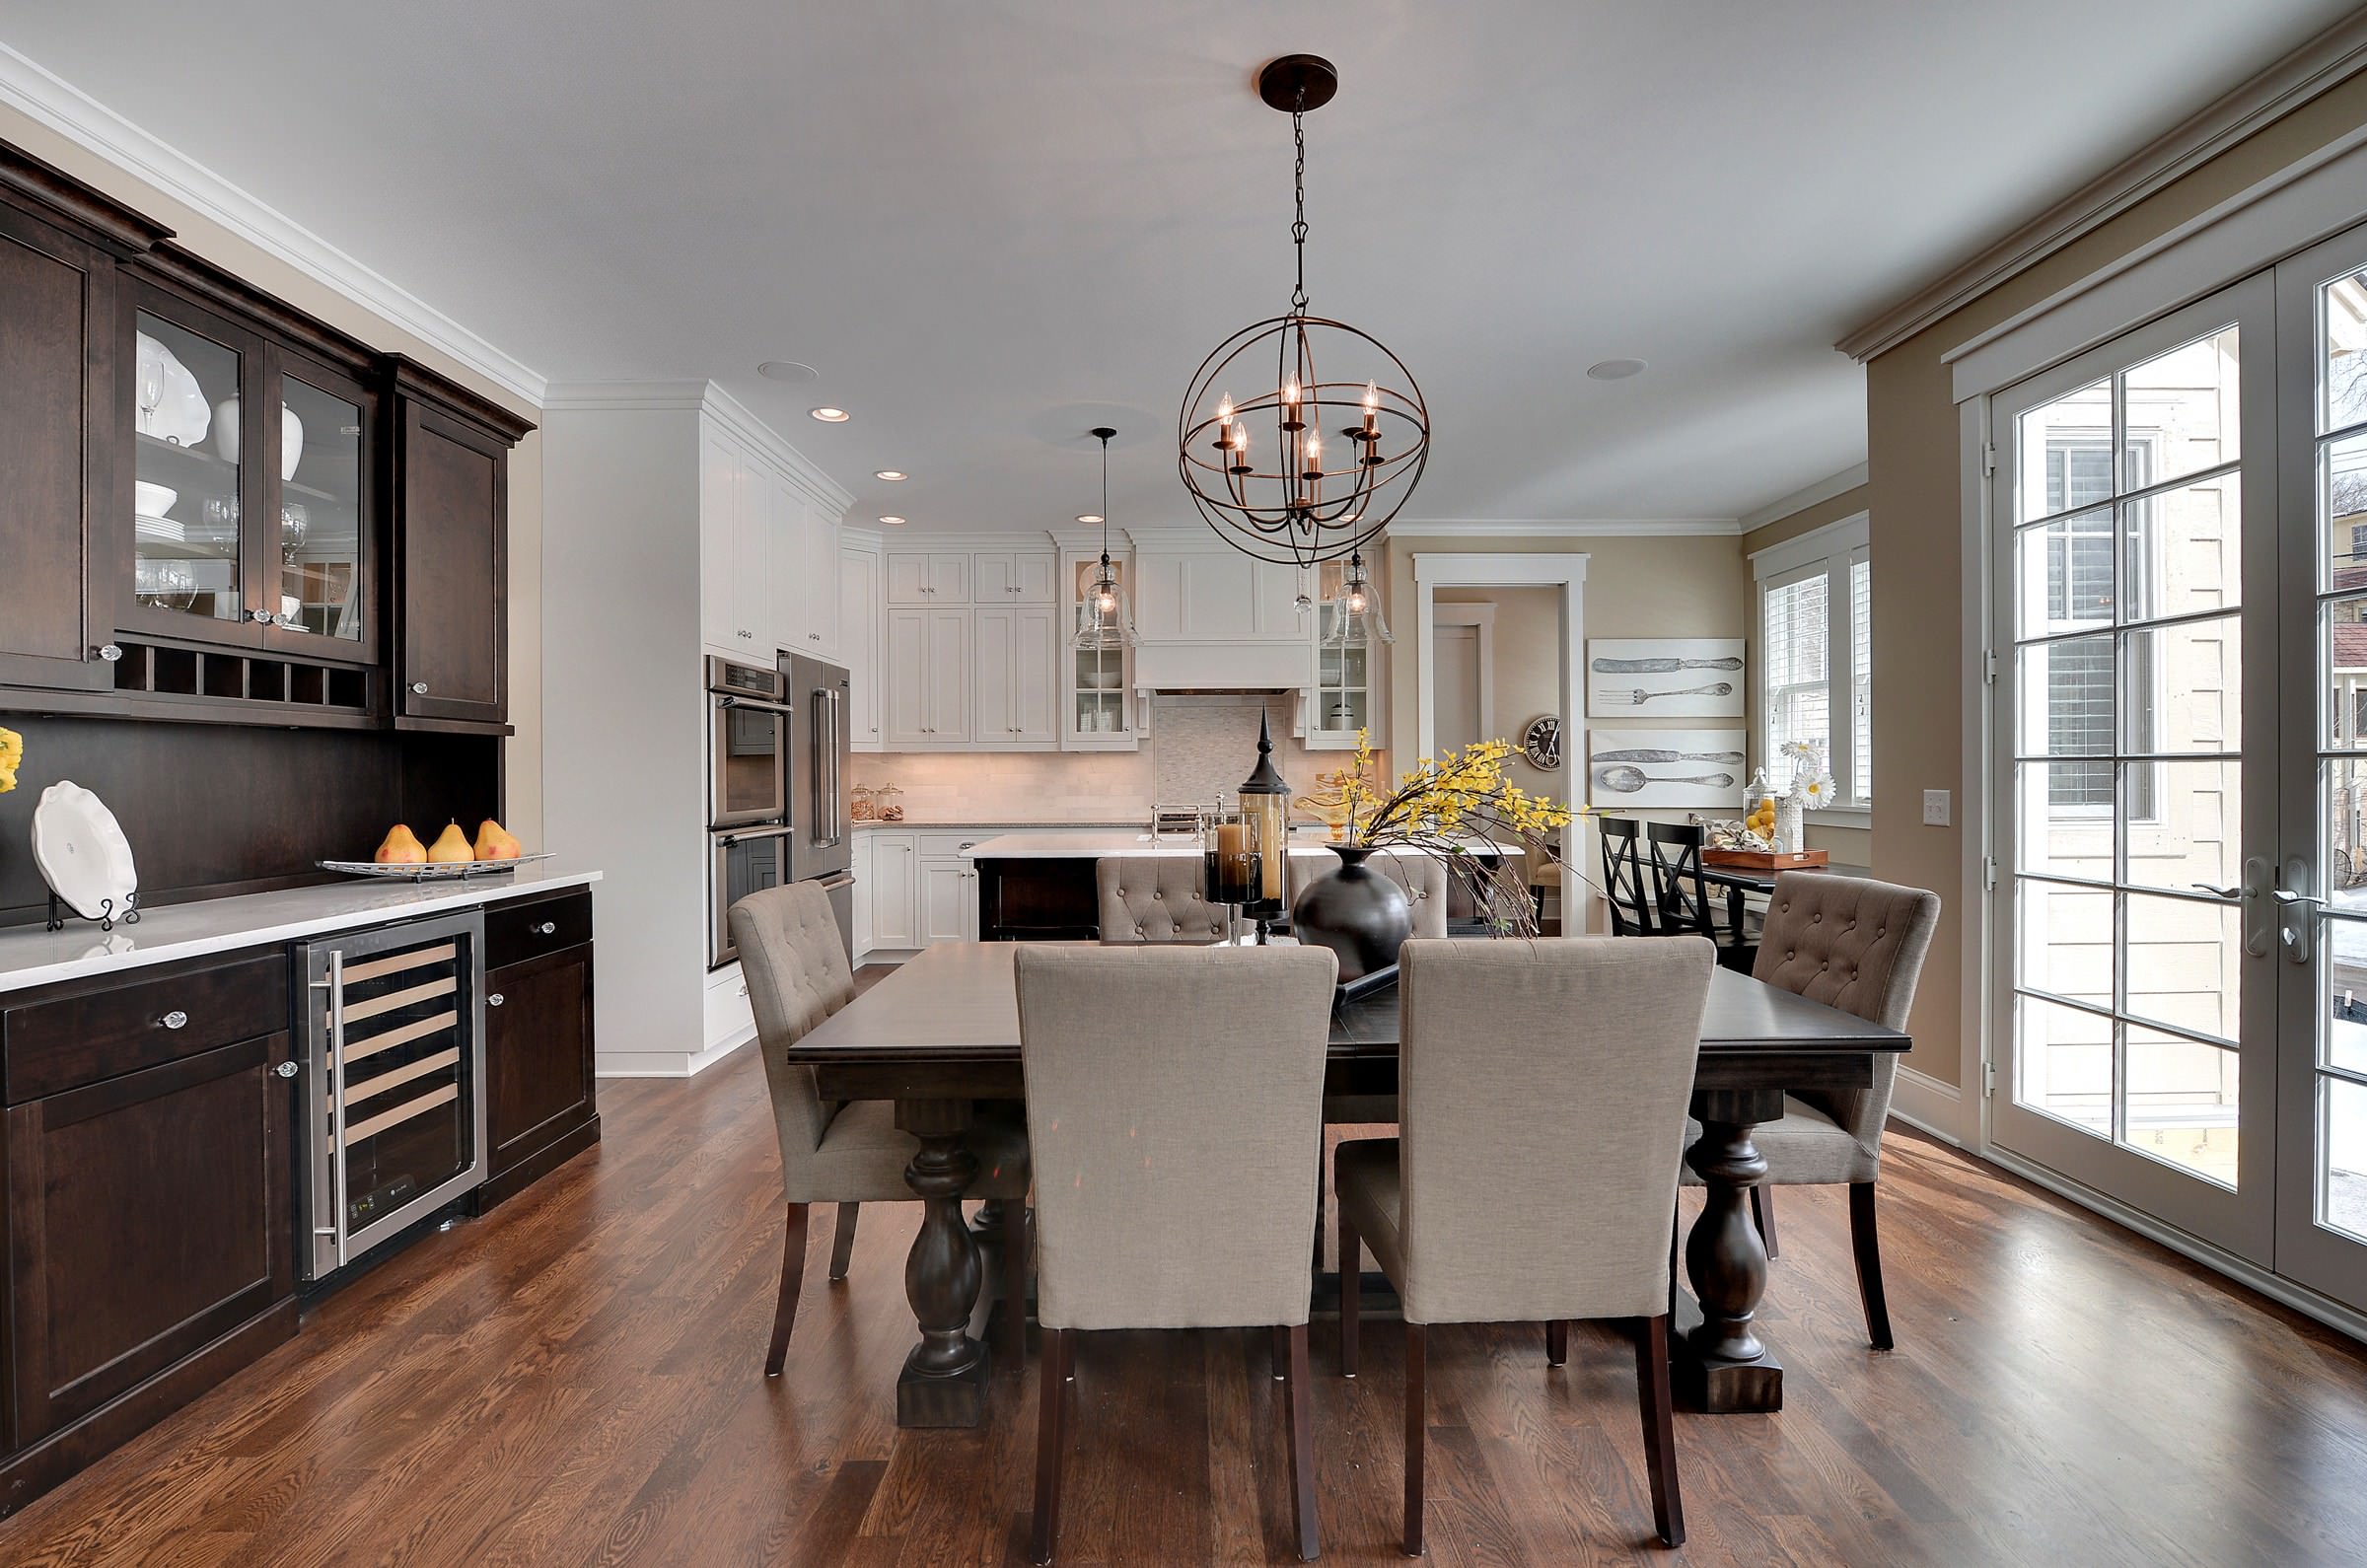 Dining Room Buffet With Wine Cooler - Photos & Ideas | Houzz